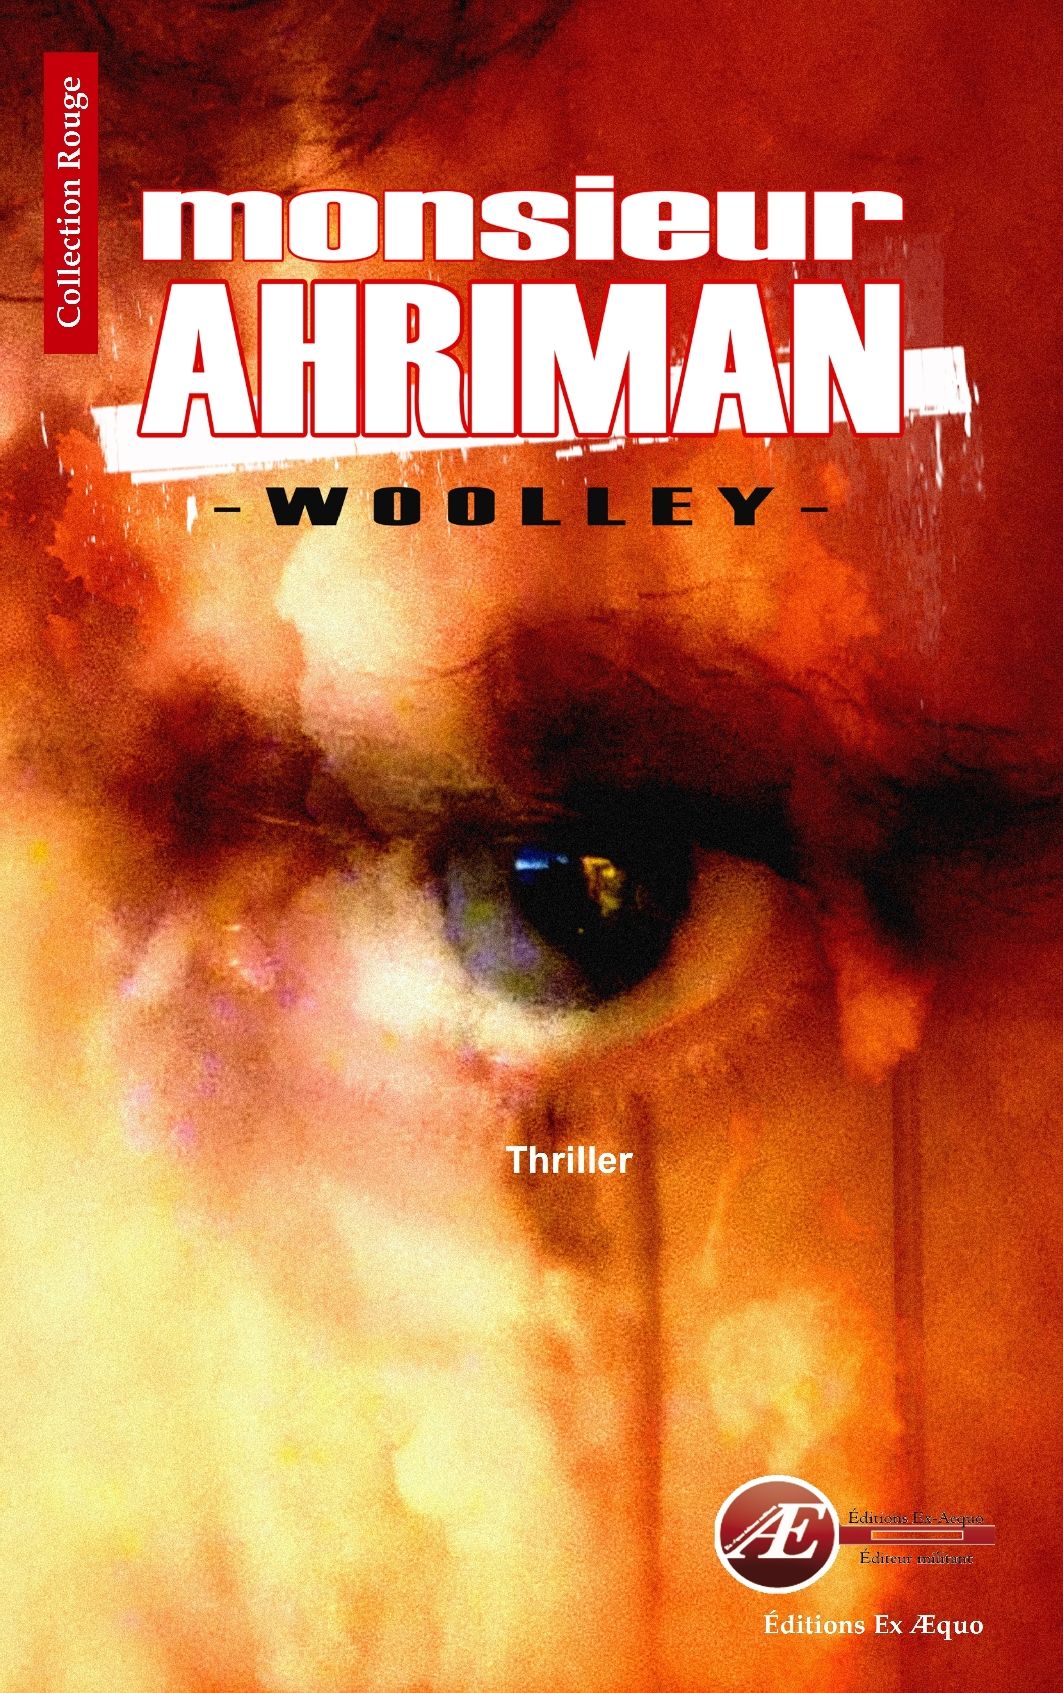 You are currently viewing Monsieur Ahriman, de Patrice Woolley